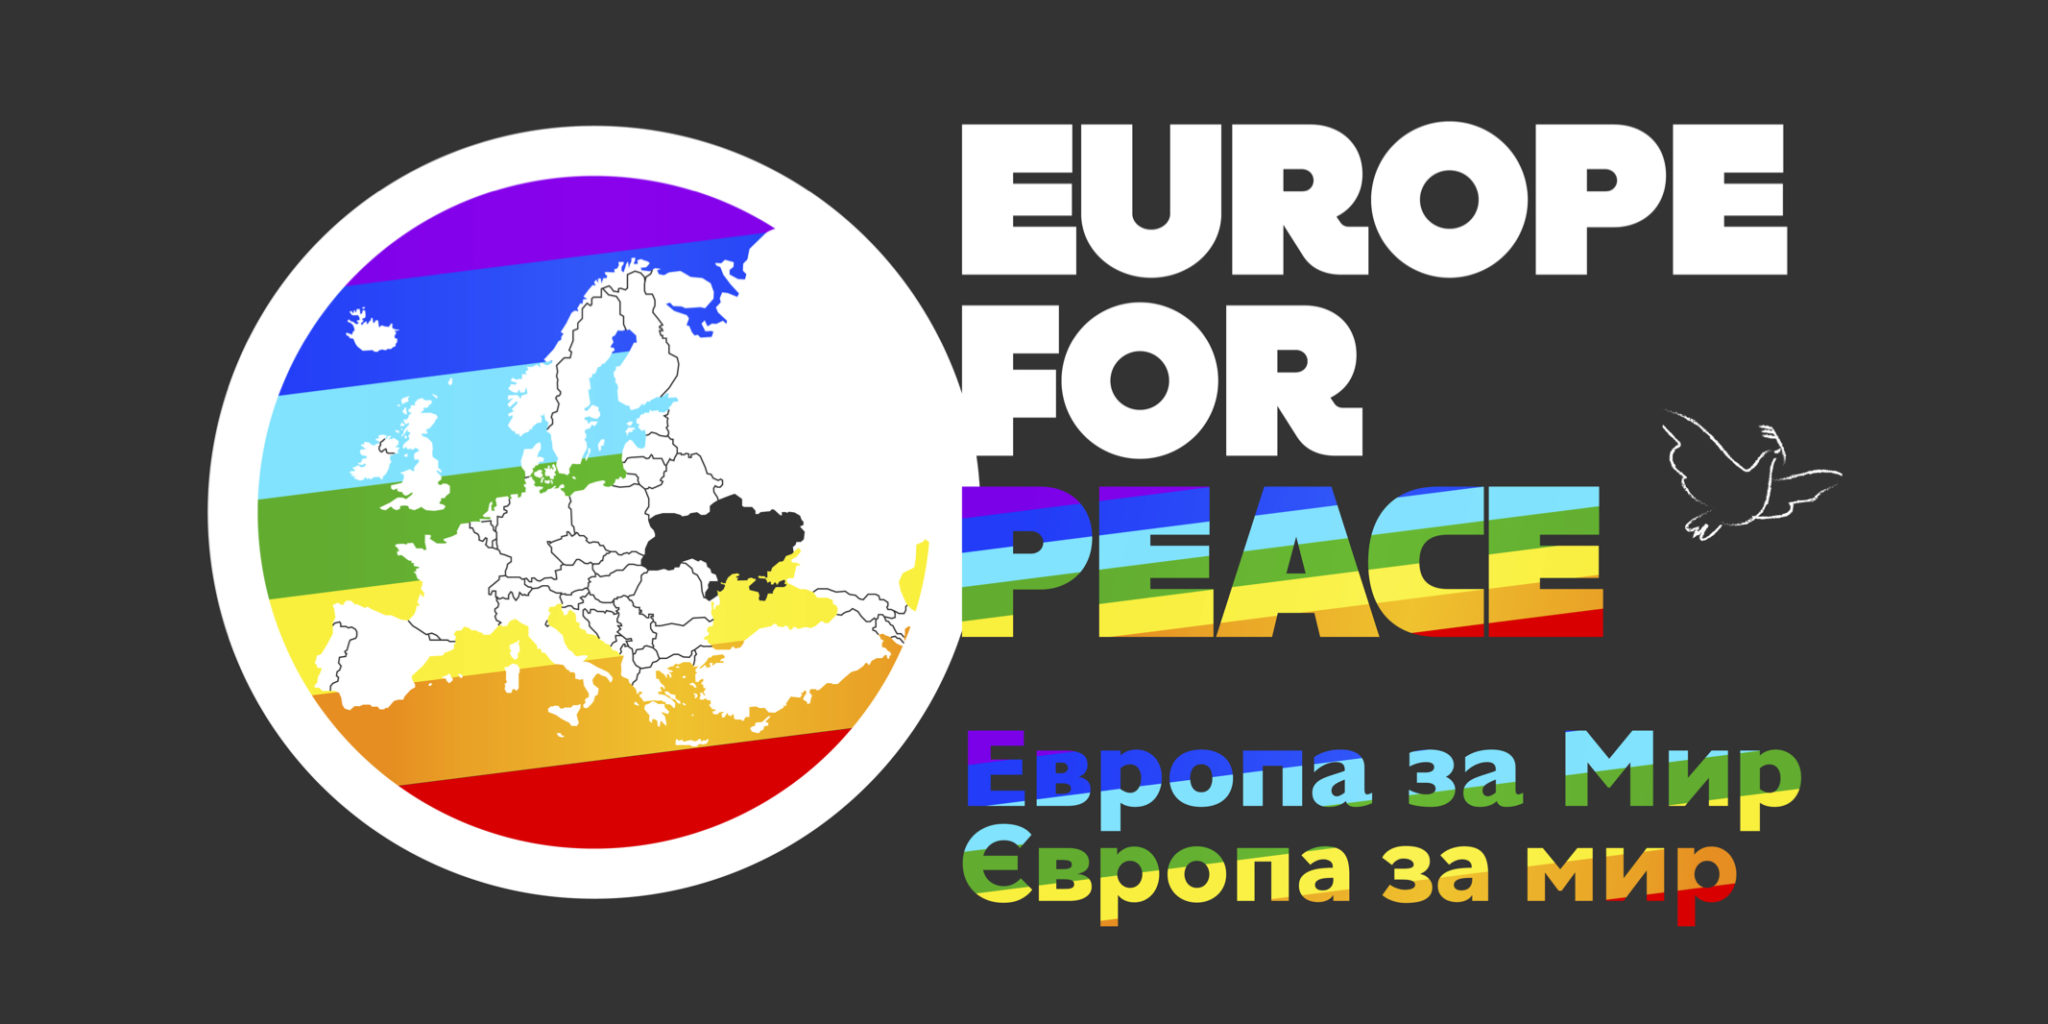 Europe for peace